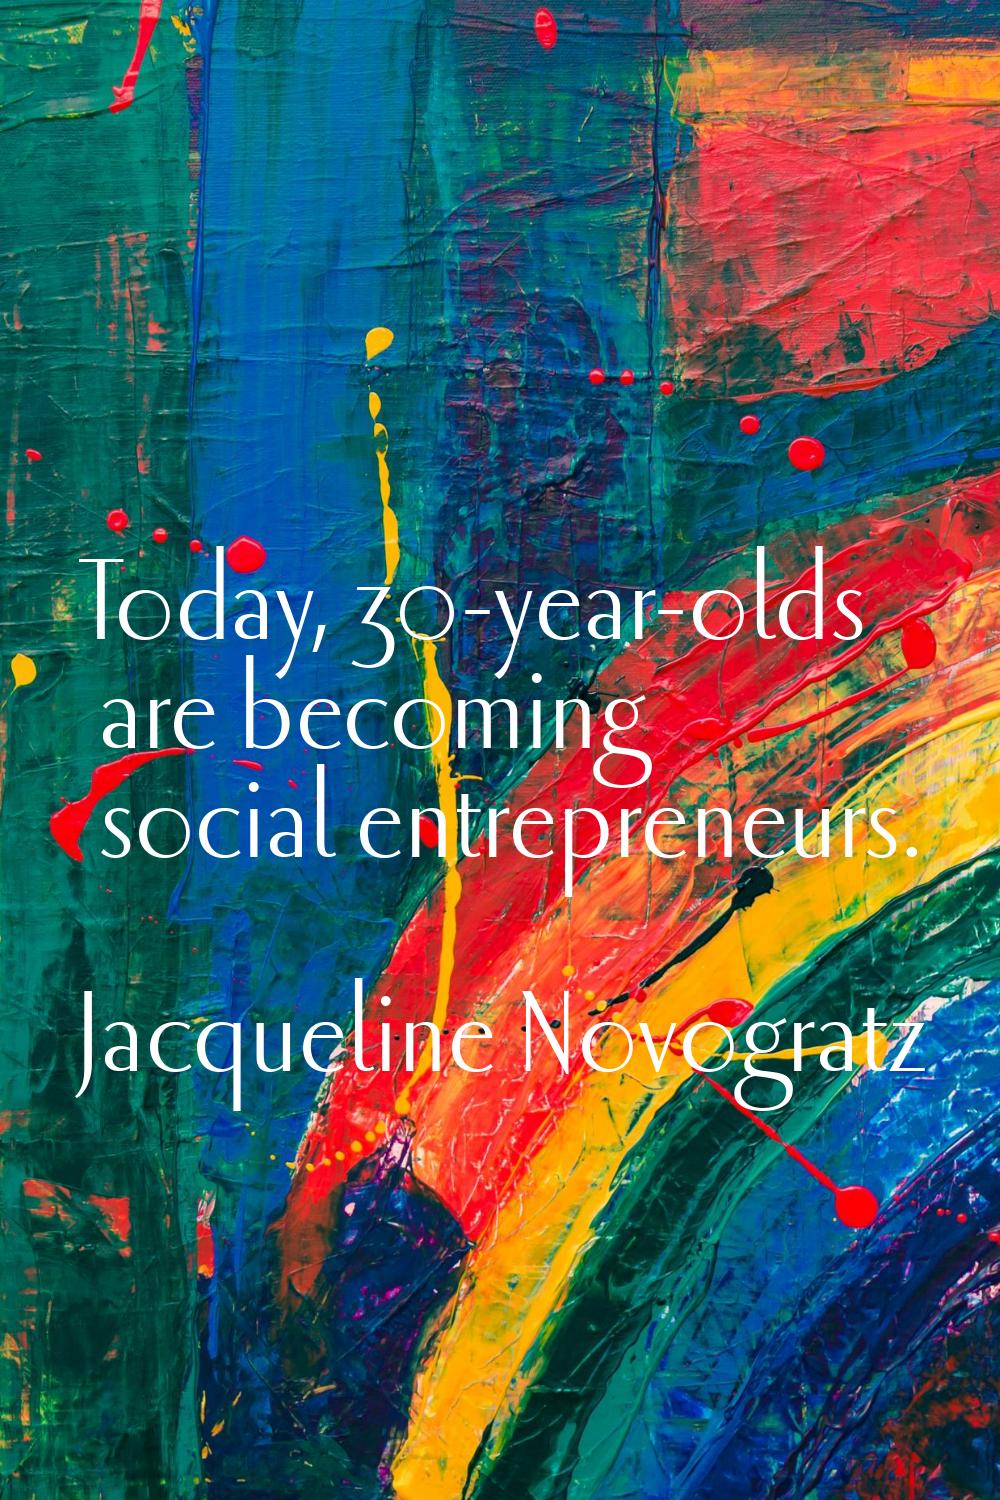 Today, 30-year-olds are becoming social entrepreneurs.